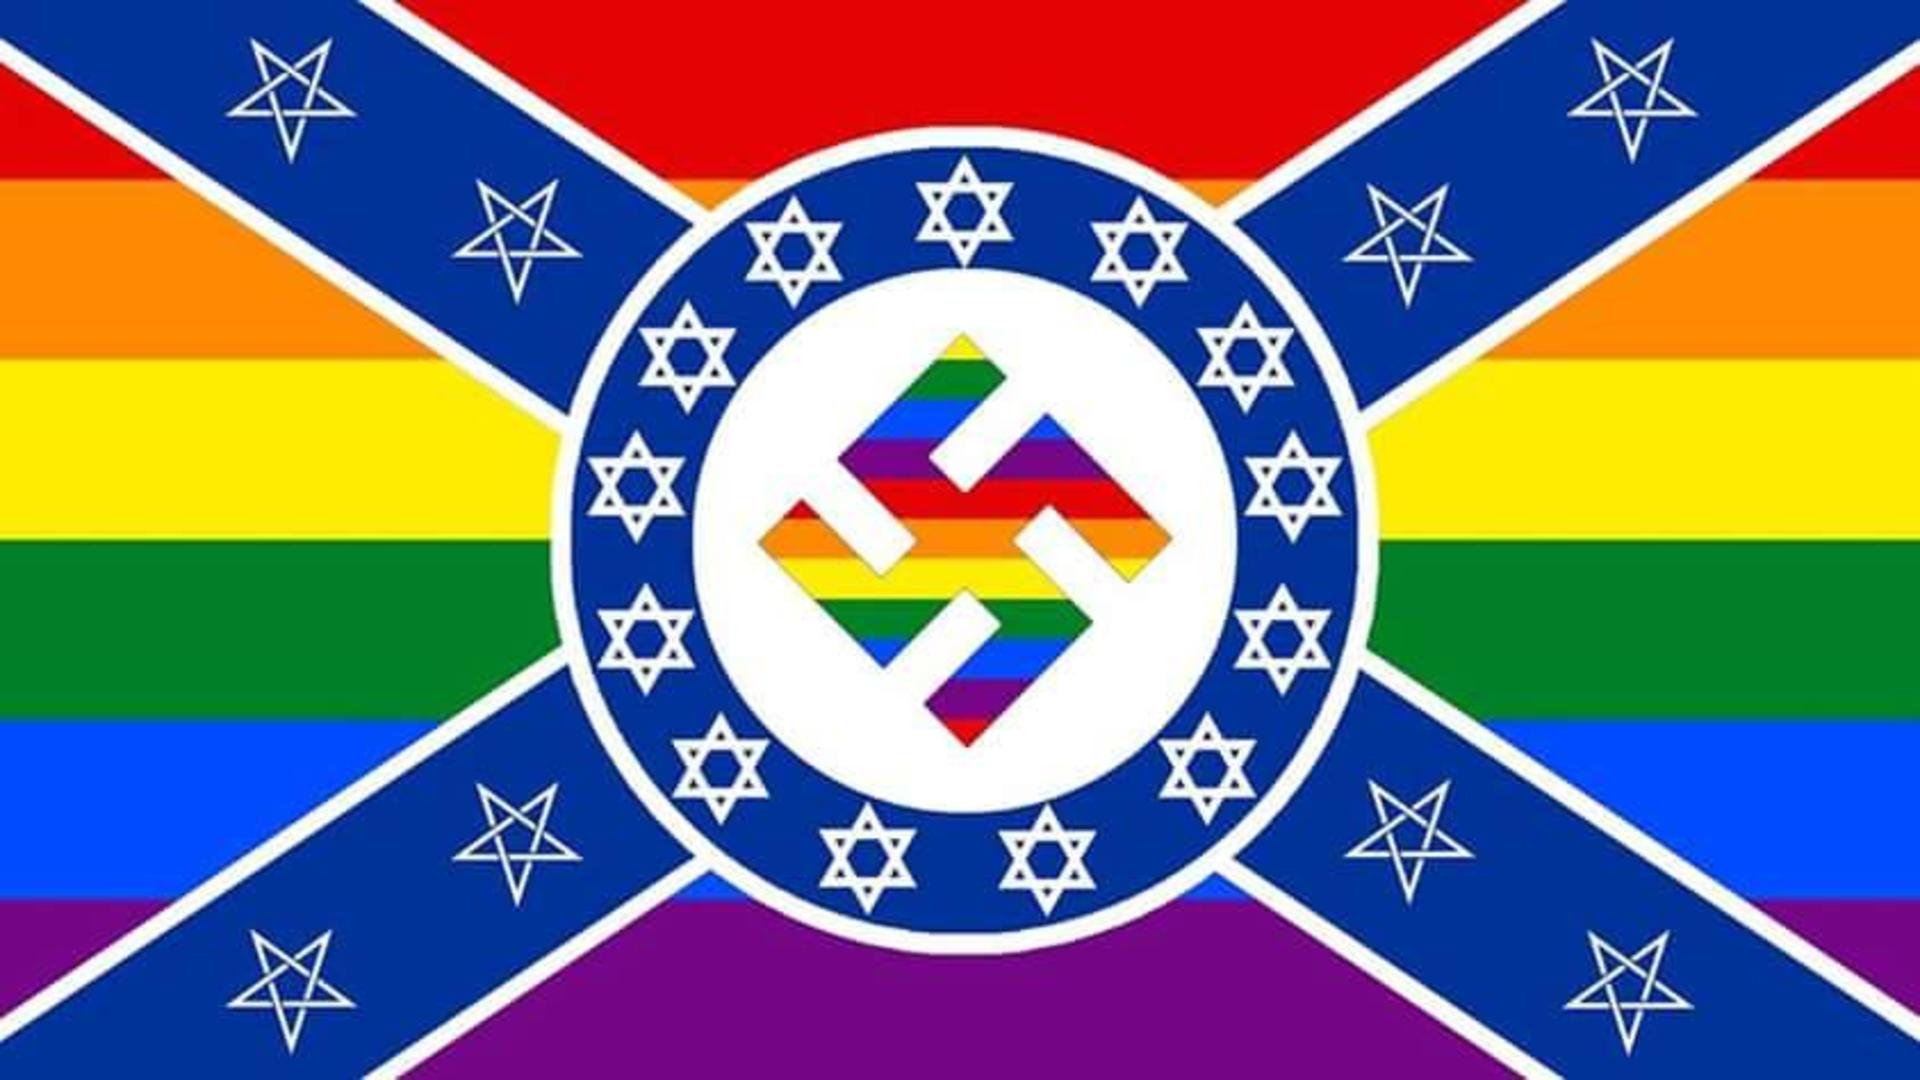 Since everyone is offended by flags here's one that fits for everyone.